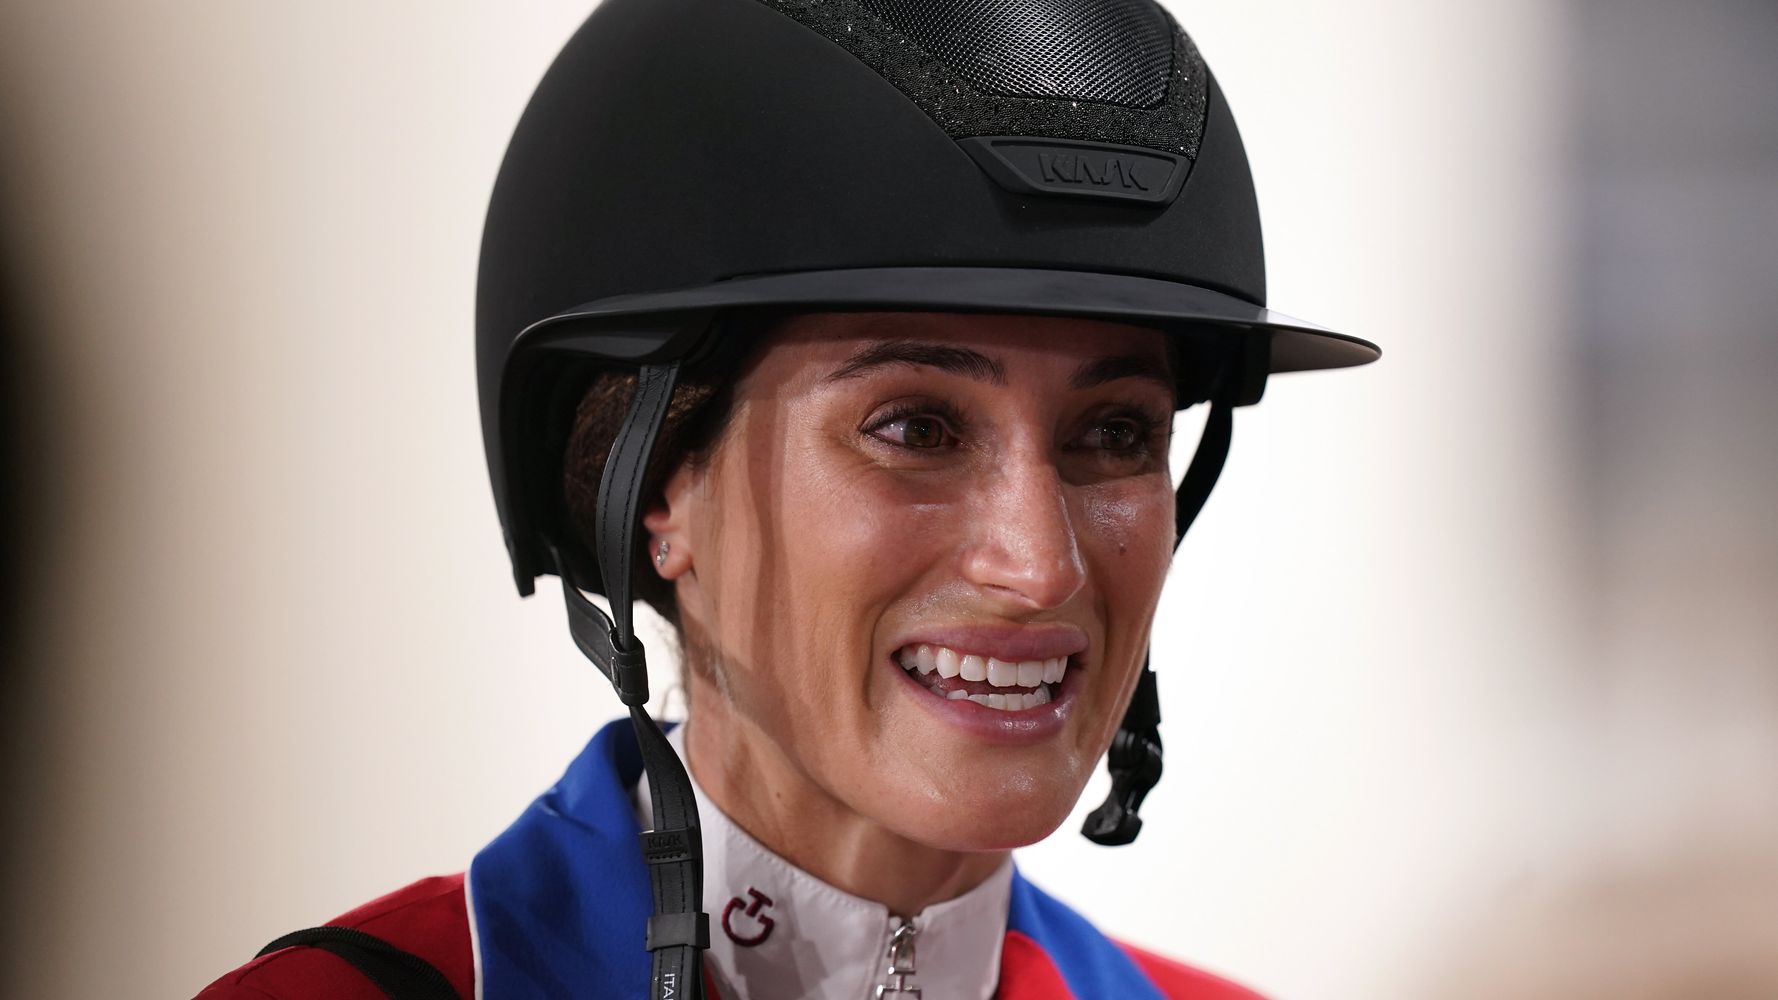 Jessica Springsteen Helps U.S. Equestrian Jumping Team To Olympic Silver